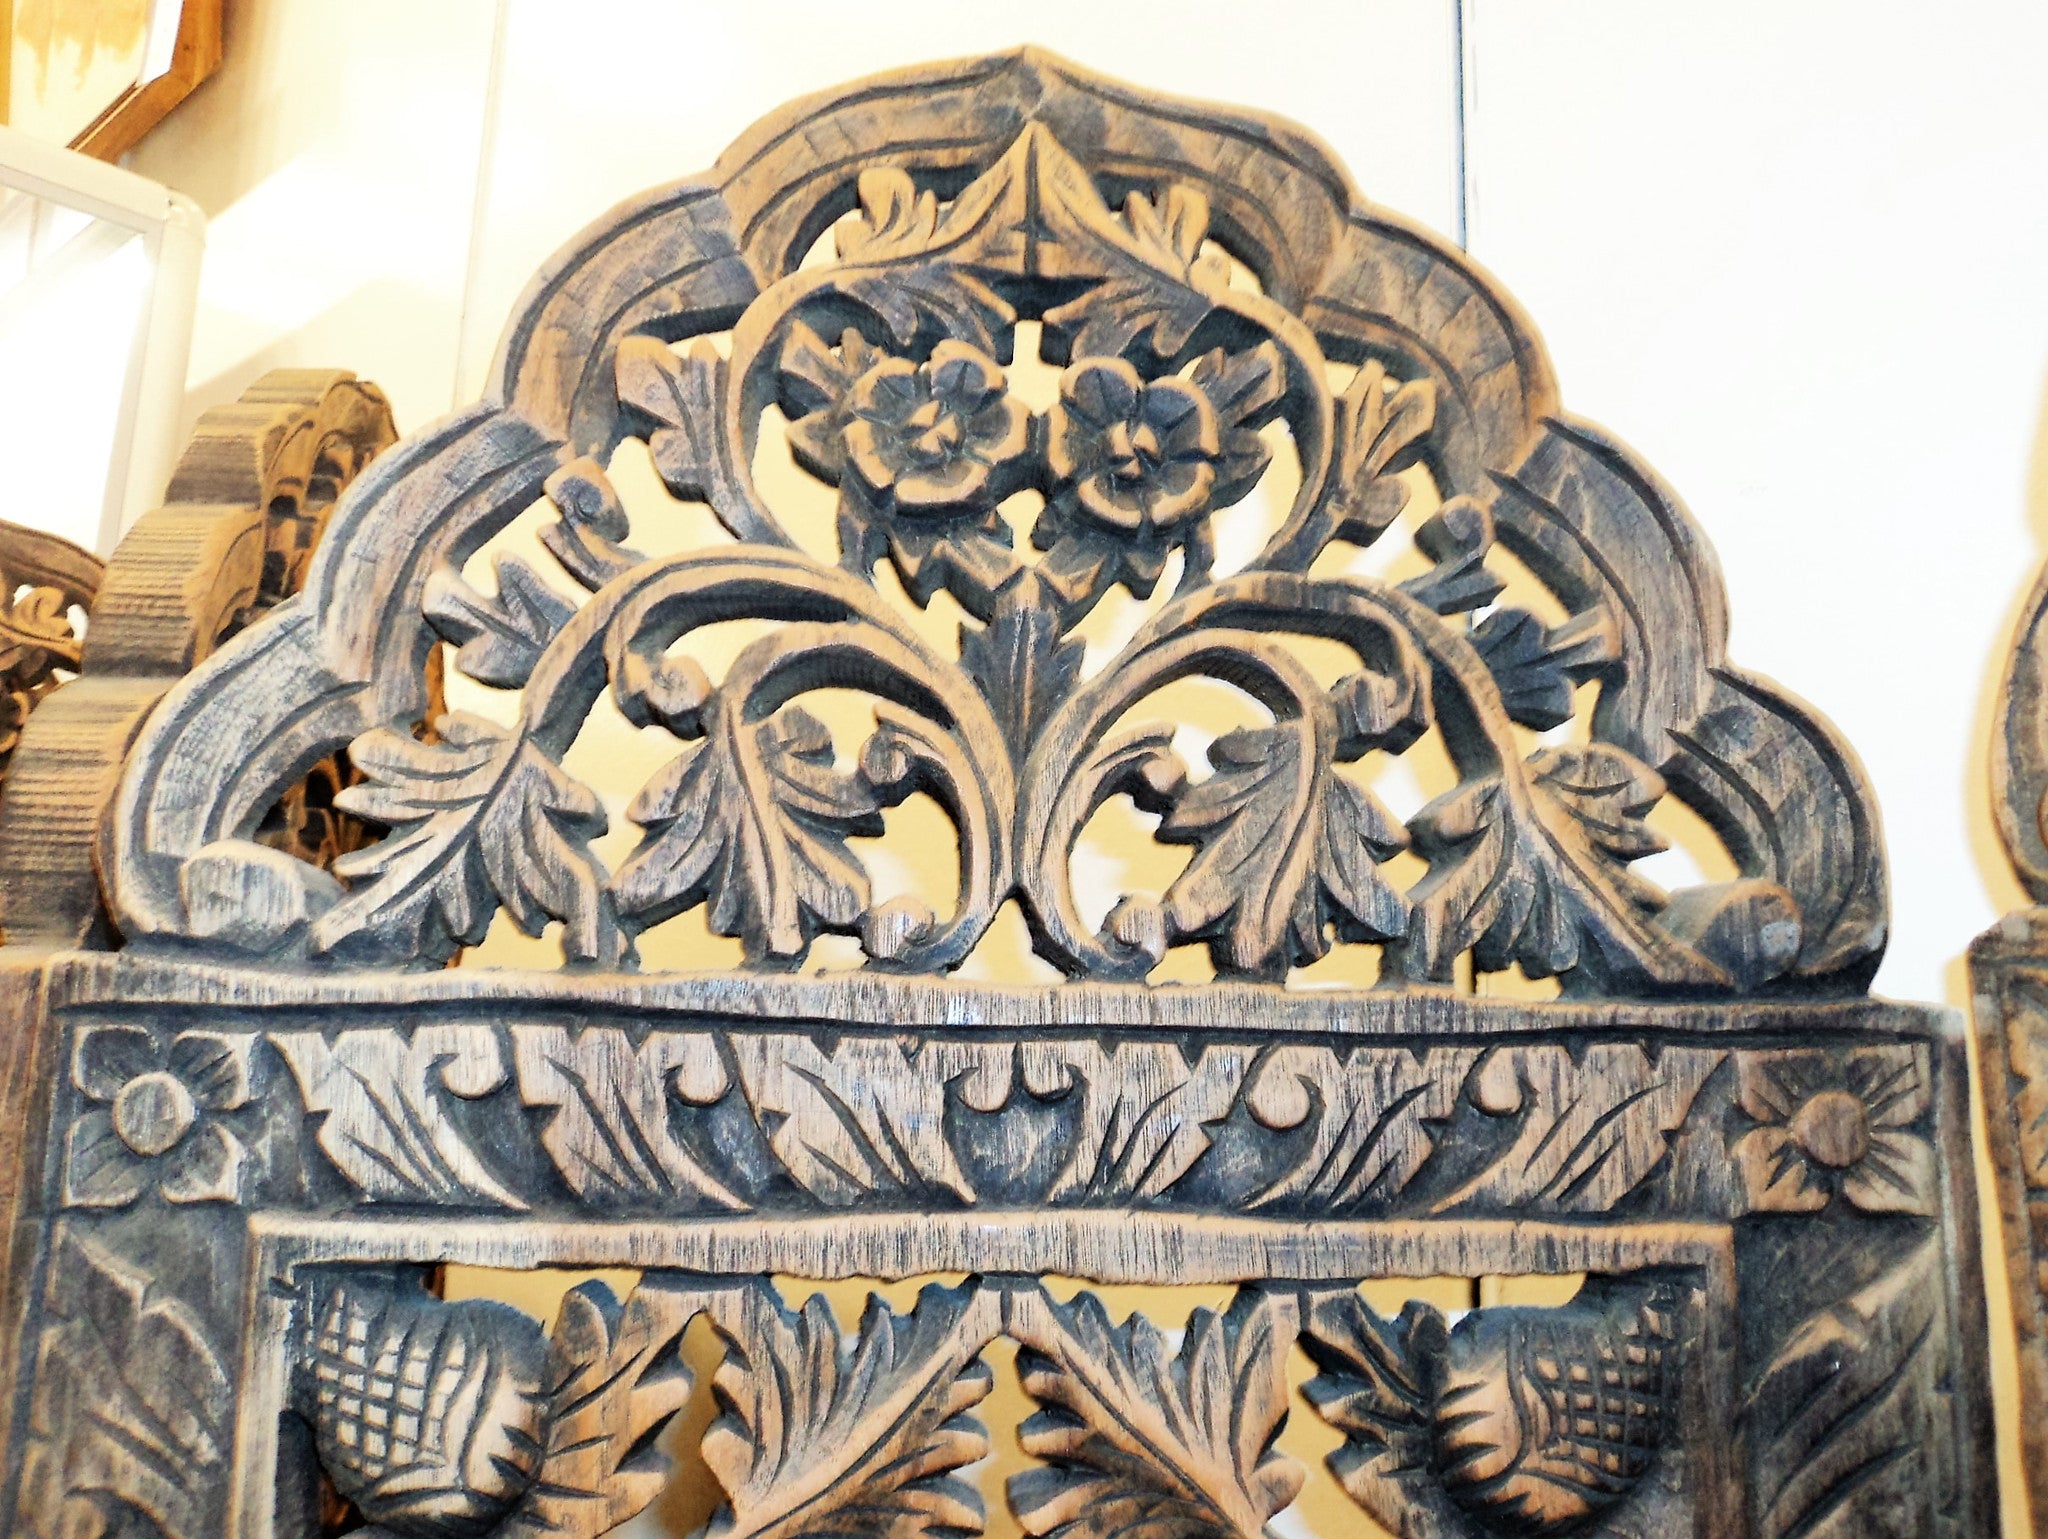 Six-panel Wood Carved Reticulated Screen